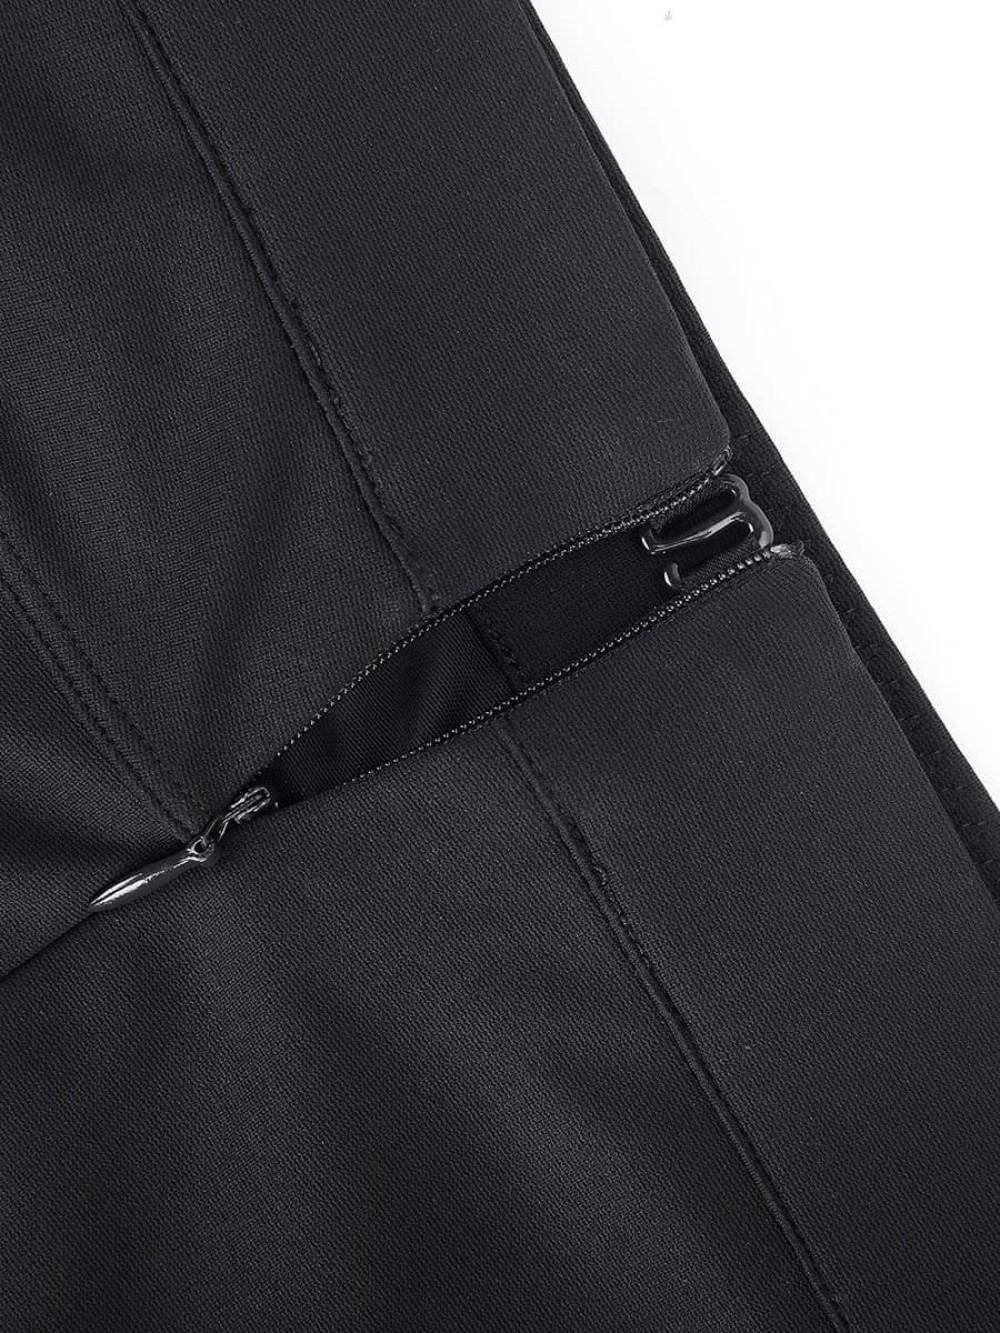 Fashion Waist Trimming Straight-leg pants with Built-in Shaping Shorts